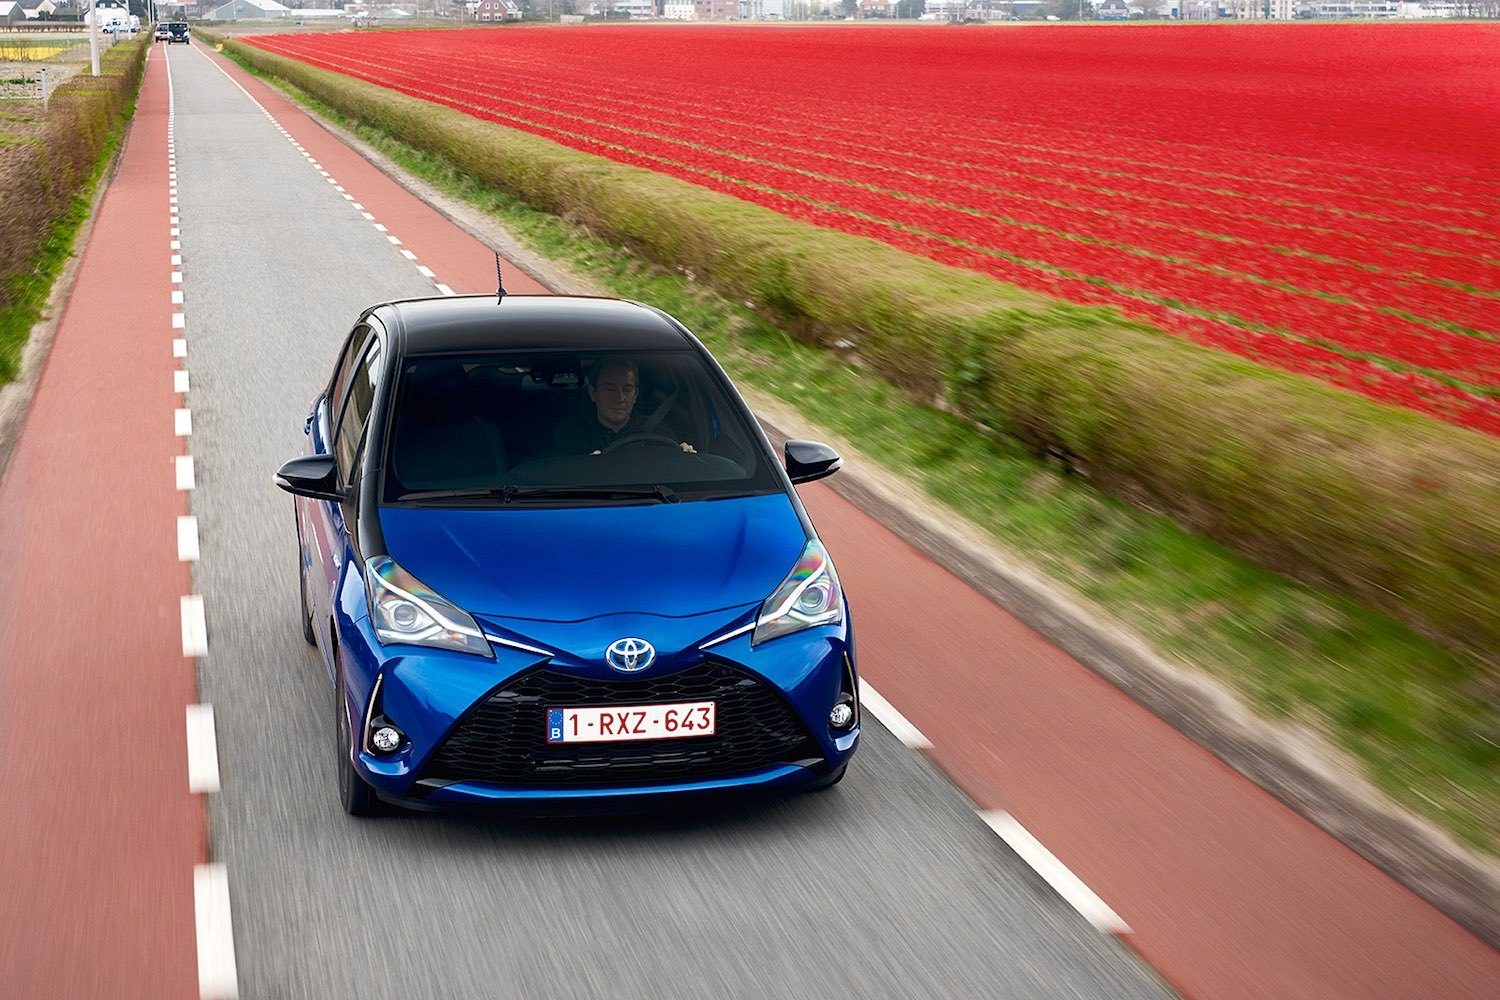 Tim Barnes-Clay drives the New Toyota Yaris car review by Drive 14